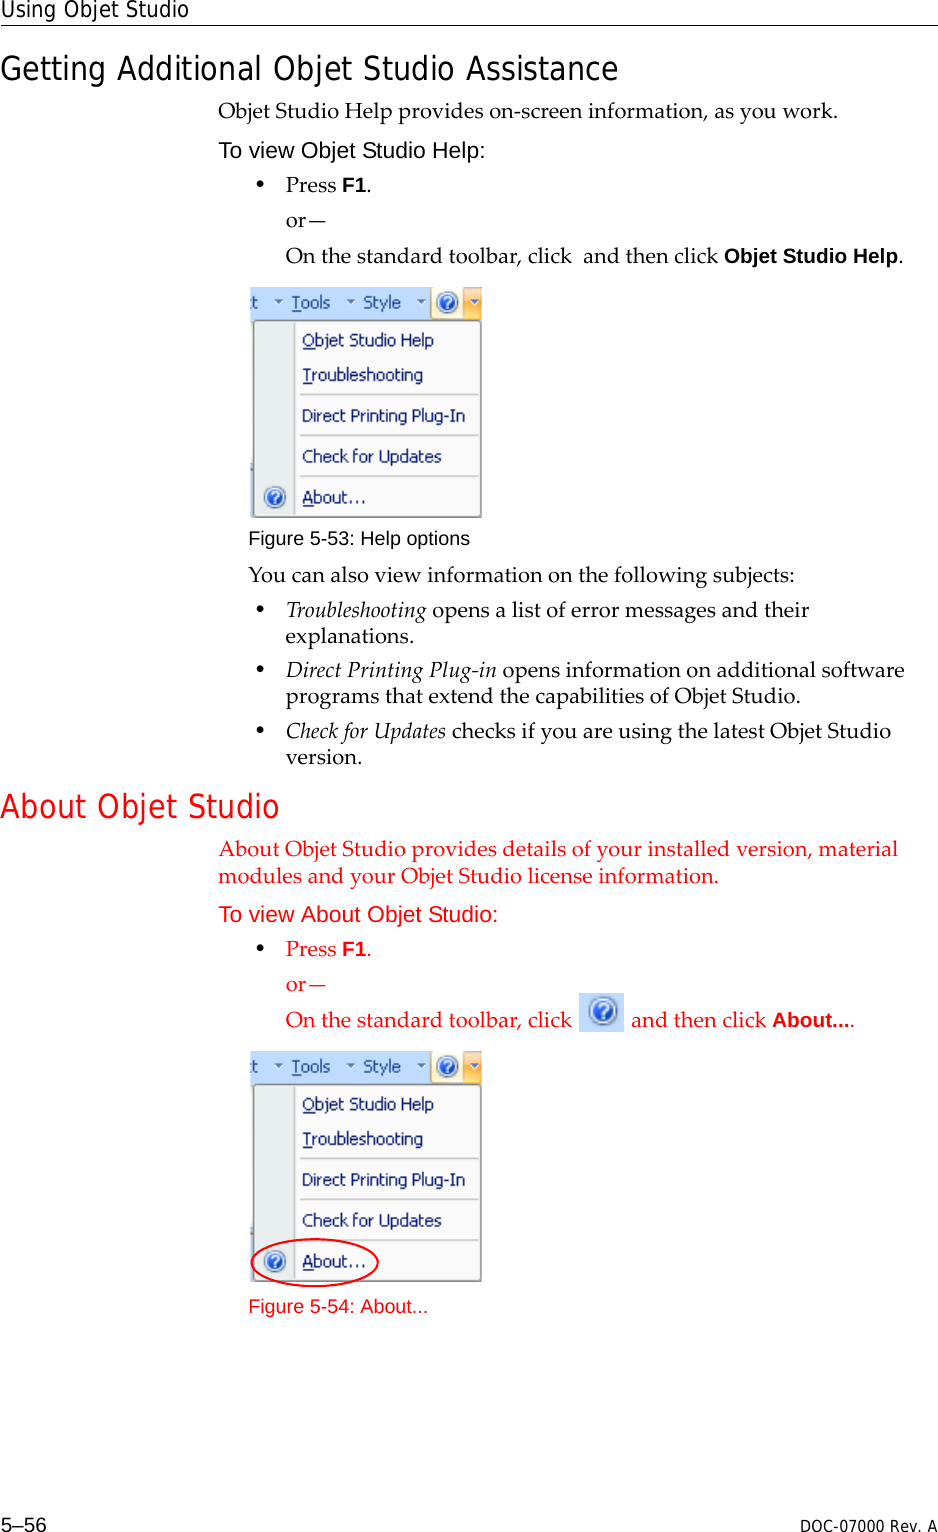 Using Objet Studio5–56 DOC-07000 Rev. AGetting Additional Objet Studio AssistanceObjetStudioHelpprovideson‐screeninformation,asyouwork.To view Objet Studio Help:•PressF1.or—Onthestandardtoolbar,clickandthenclickObjet Studio Help.Figure 5-53: Help optionsYoucanalsoviewinformationonthefollowingsubjects:•Troubleshootingopensalistoferrormessagesandtheirexplanations.•DirectPrintingPlug‐inopensinformationonadditionalsoftwareprogramsthatextendthecapabilitiesofObjetStudio.•CheckforUpdateschecksifyouareusingthelatestObjetStudioversion.About Objet StudioAboutObjetStudioprovidesdetailsofyourinstalledversion,materialmodulesandyourObjetStudiolicenseinformation.To view About Objet Studio:•PressF1.or—Onthestandardtoolbar,clickandthenclickAbout....Figure 5-54: About...